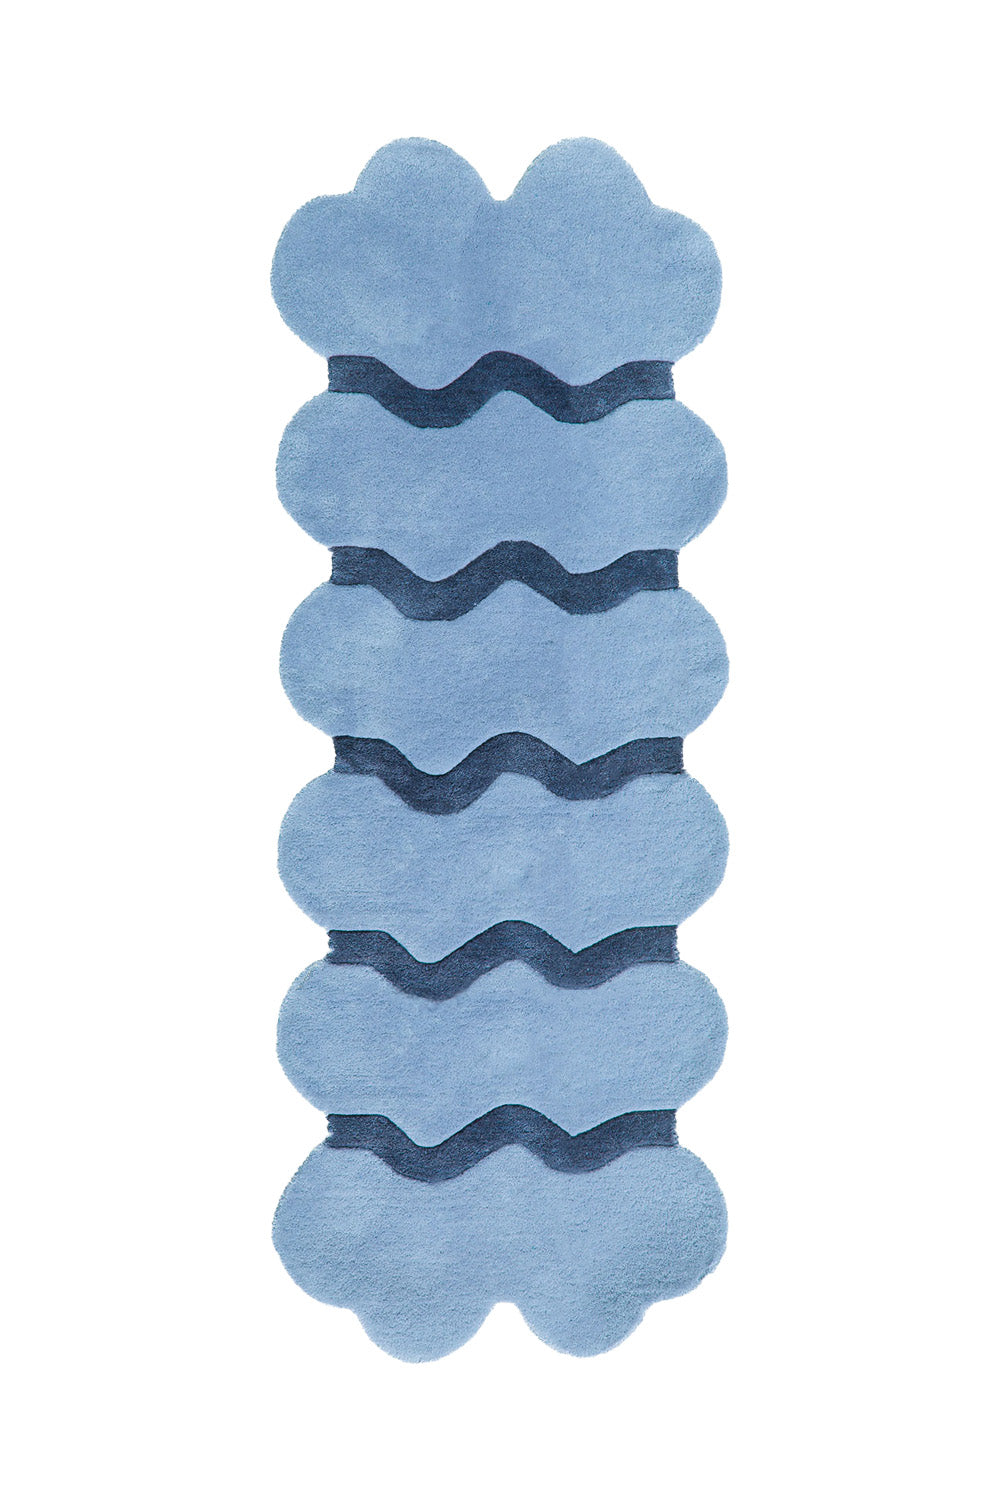 Sculpted Edge Hand Tufted Wool Runner Rug in Blue by Jubi